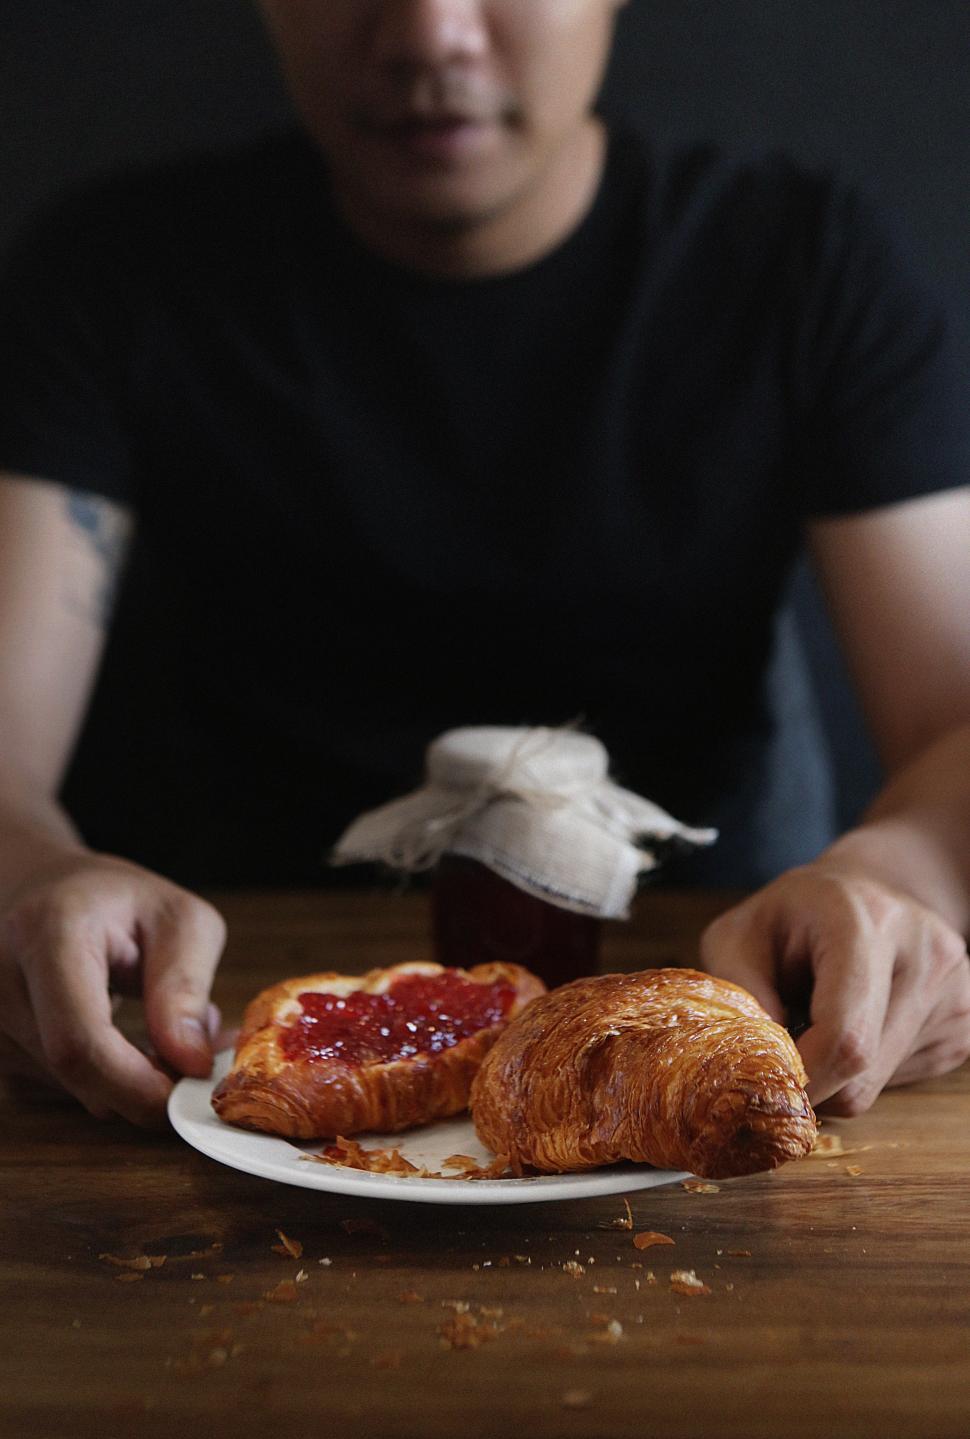 Free Image of Croissants filled with jam on breakfast table 